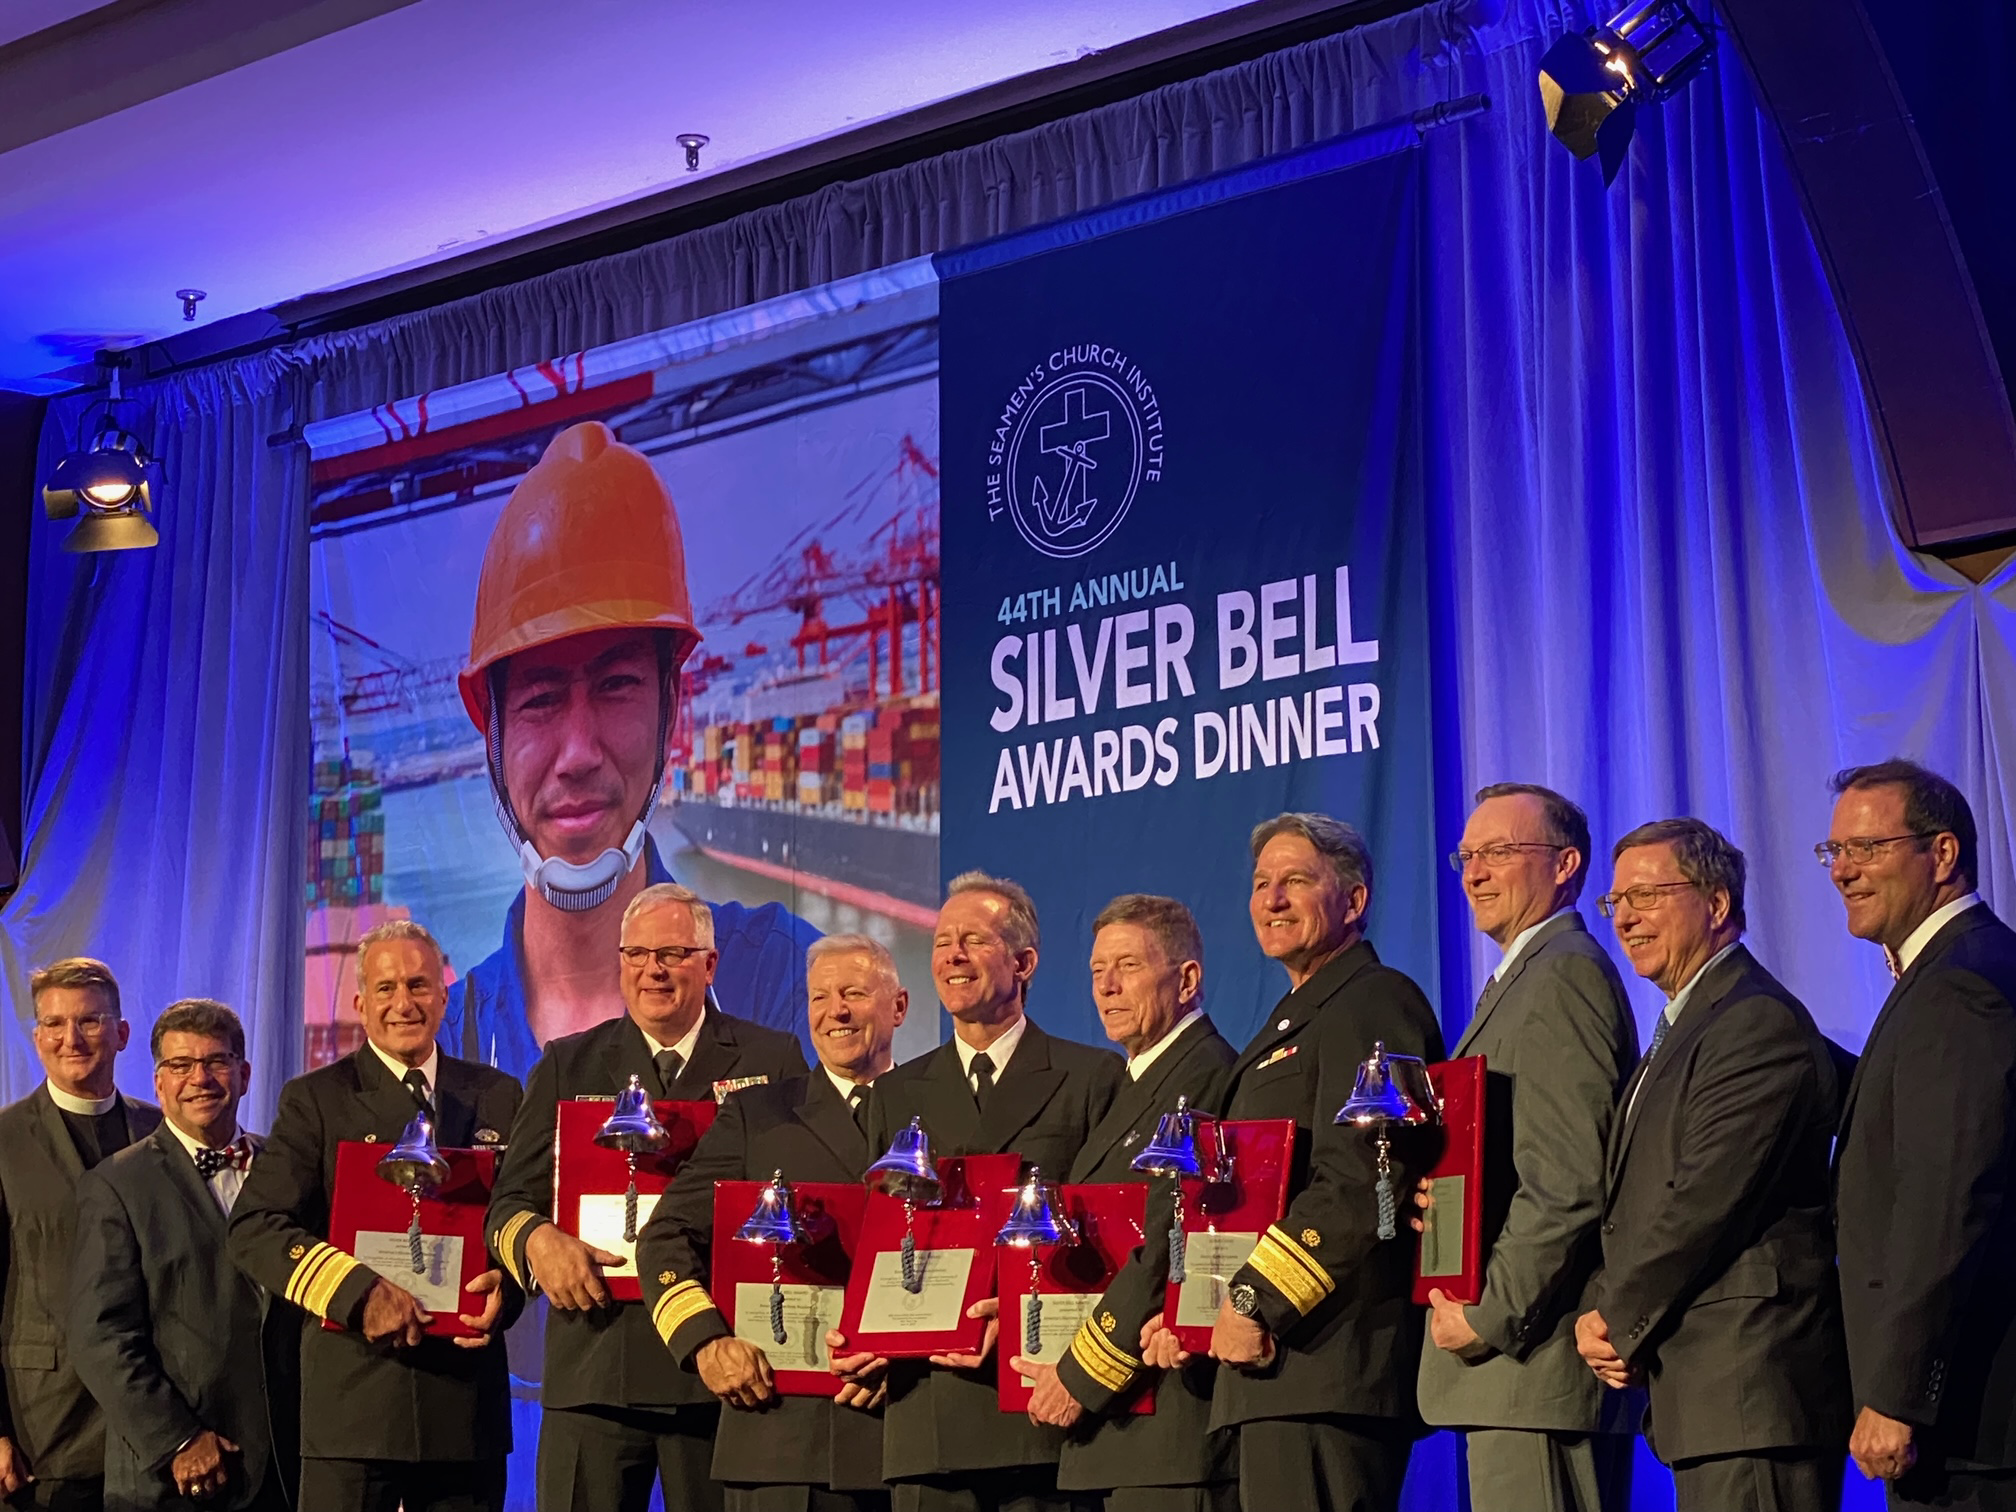 President Cropper and other receiving awards from the Seamen’s Church Institute at the 44th Annual Silver Bell Awards Diner. All seven of America’s Maritime Academies were represented with approximately 500 additional supporters.